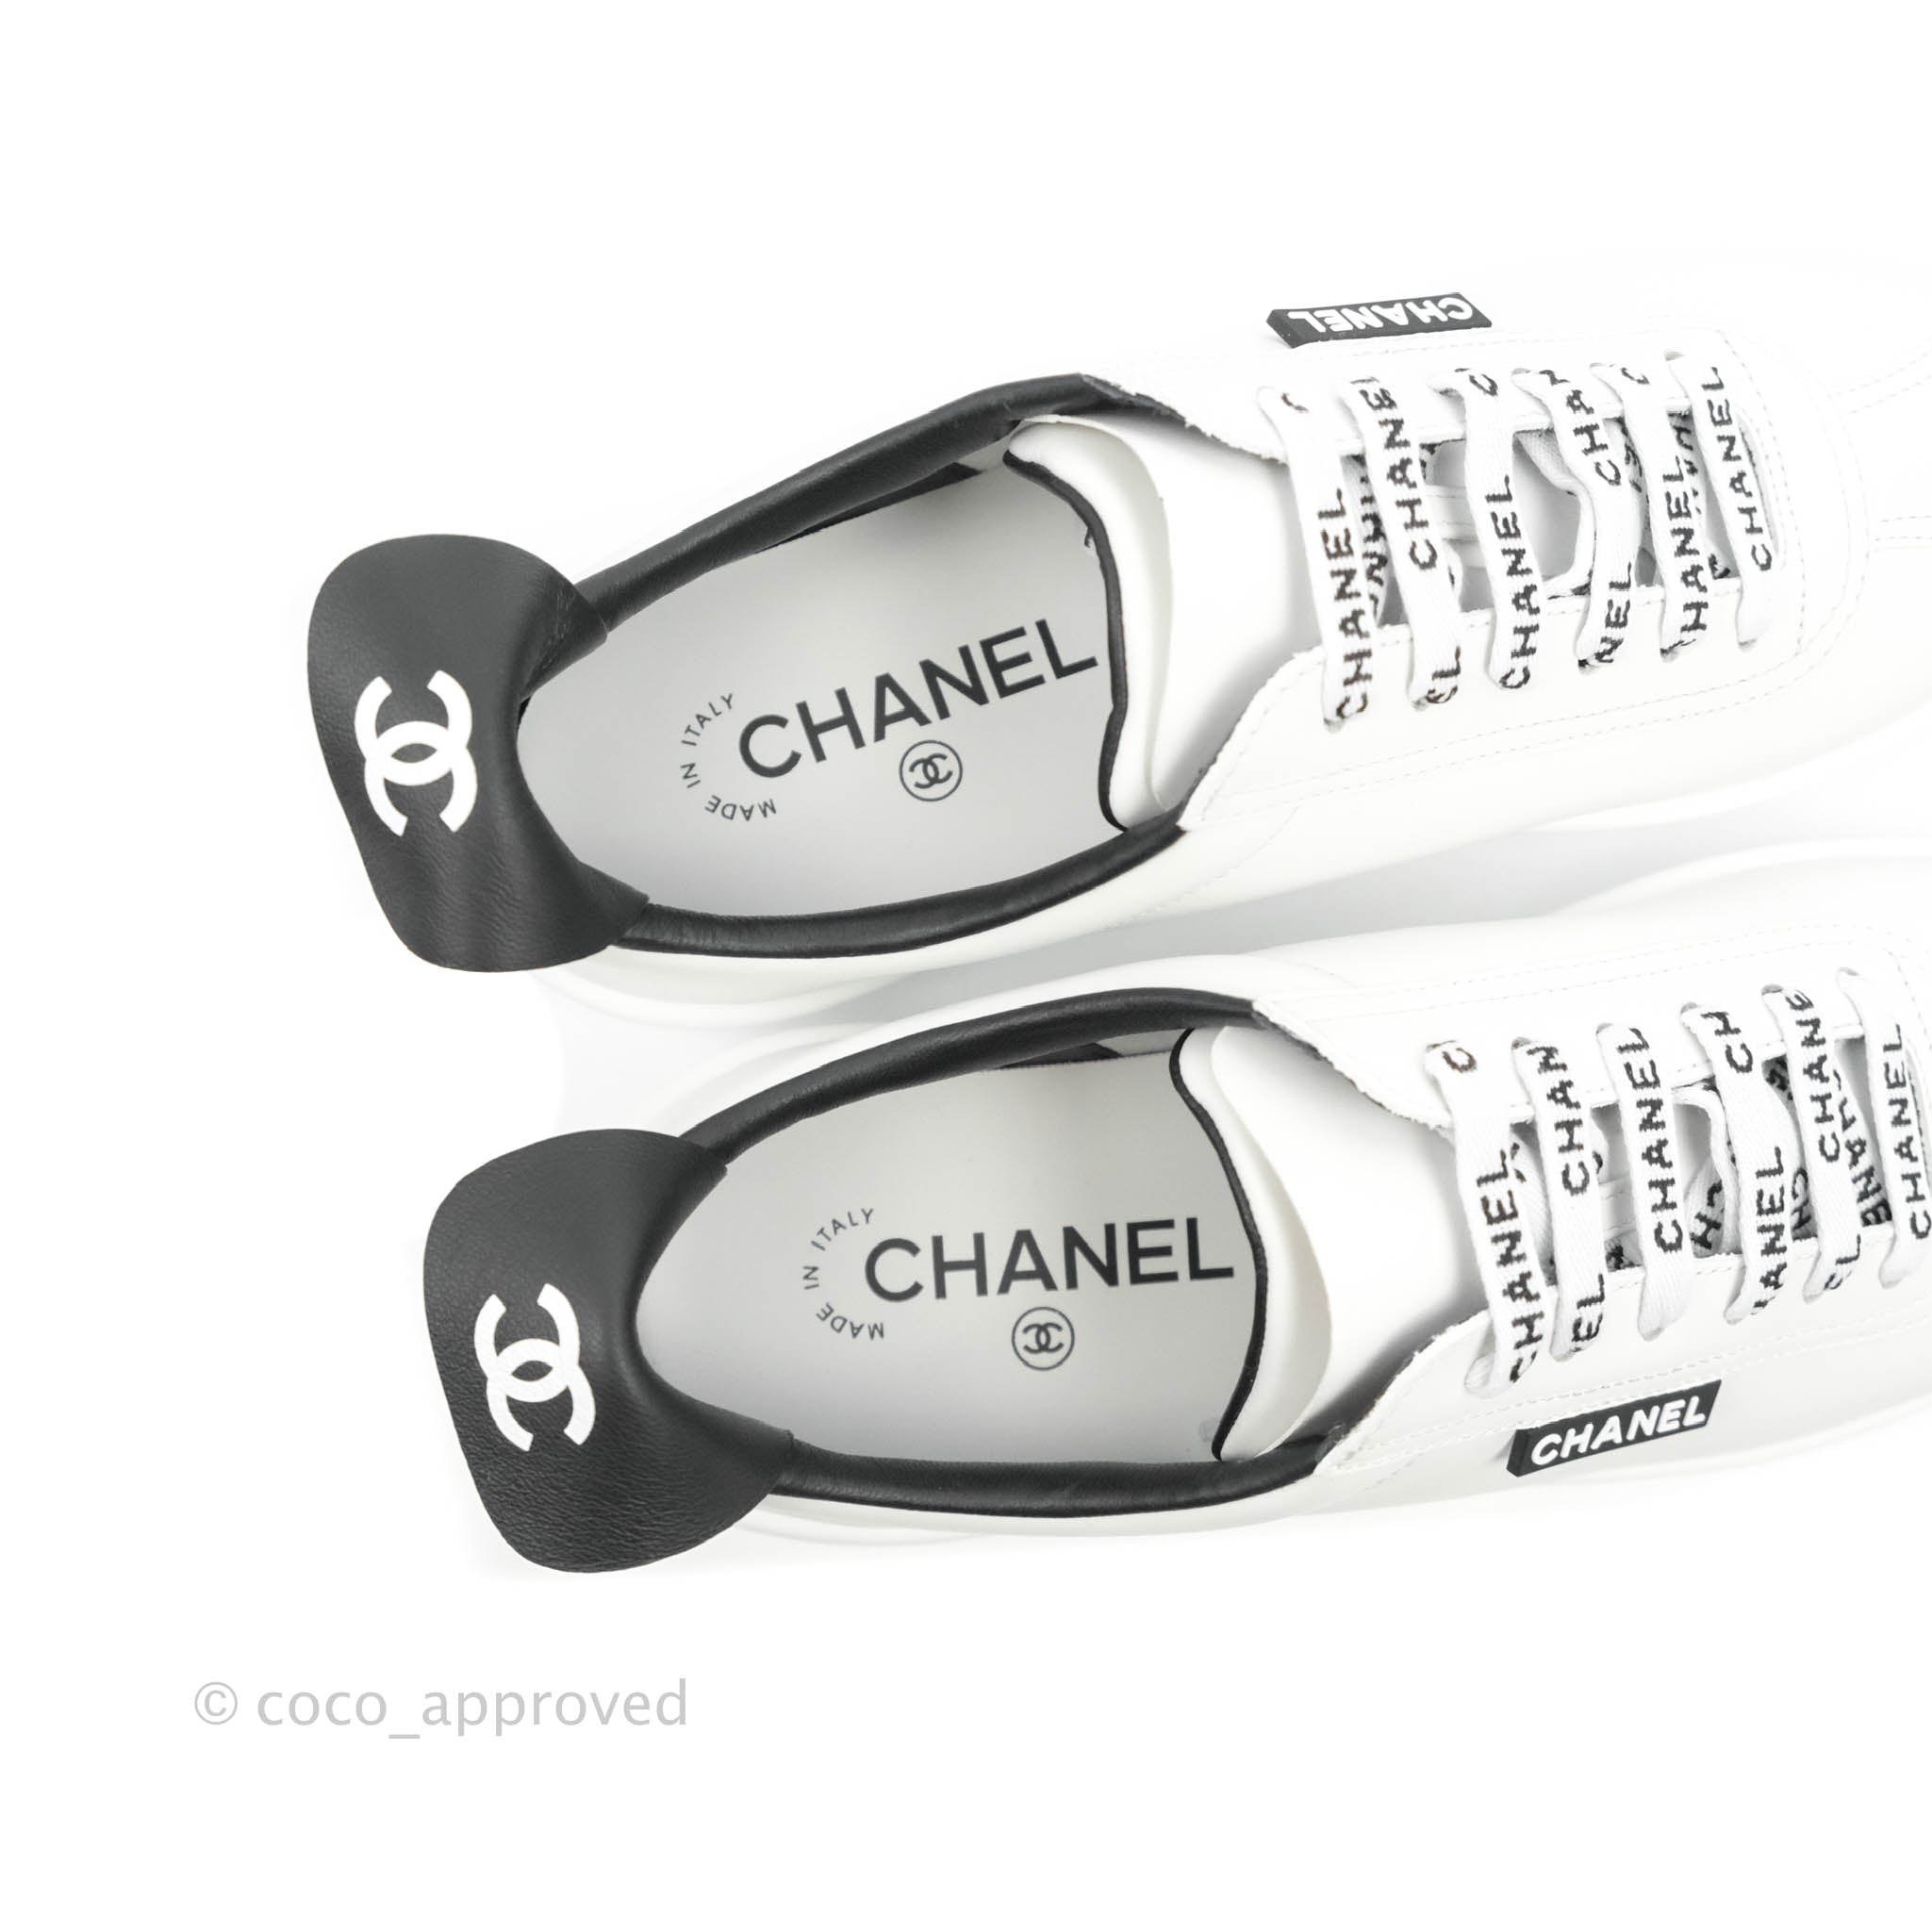 Chanel Pre-Owned Logo Pull Tab Lace-up Sneakers in White